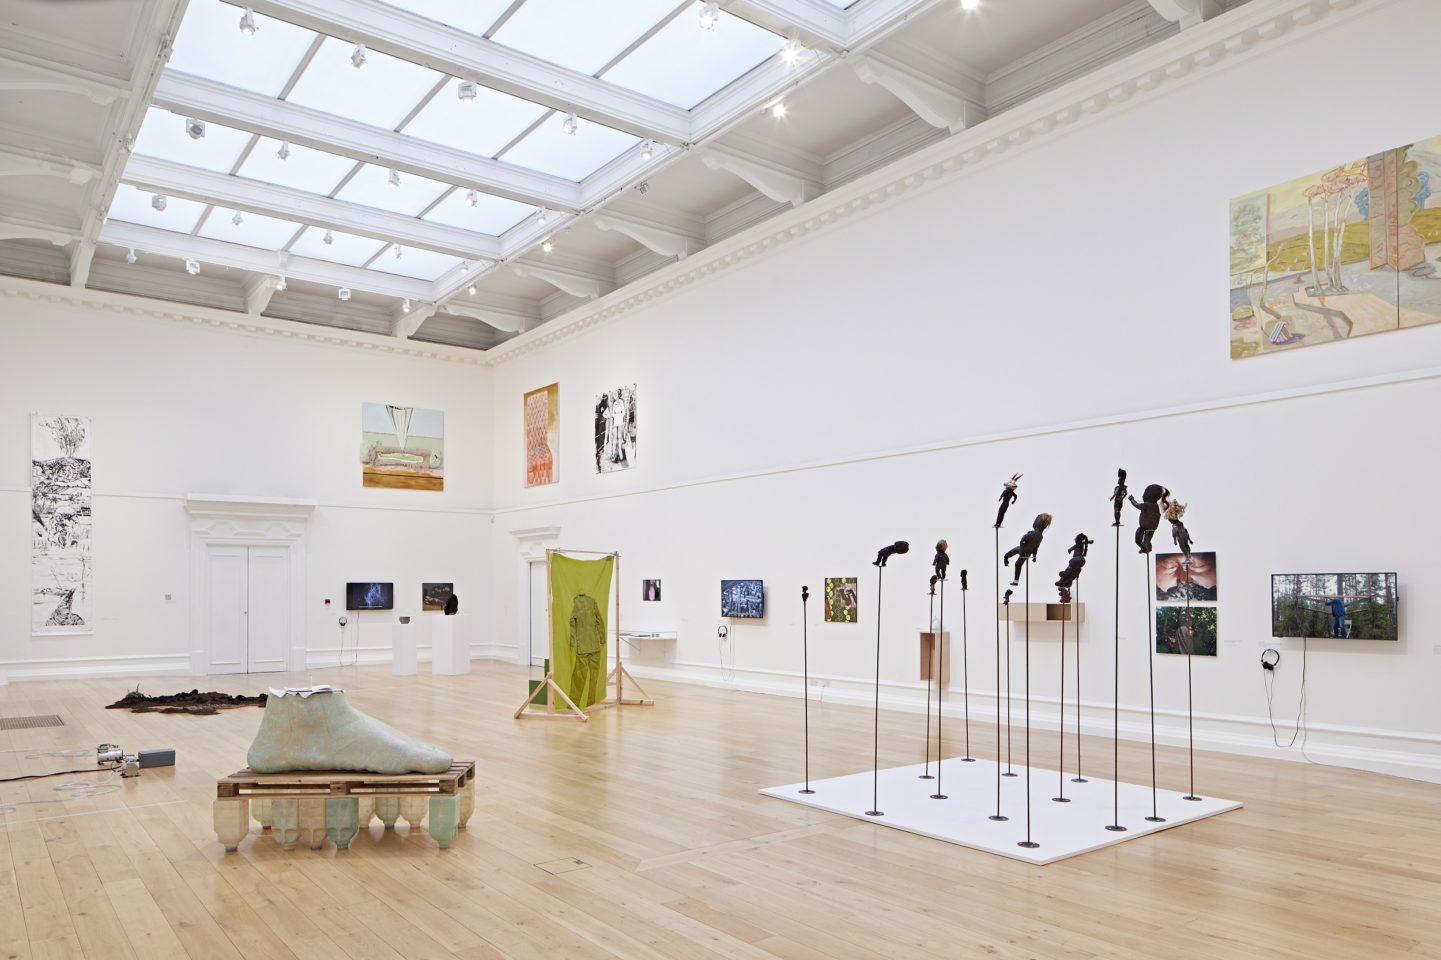 Bloomberg New Contemporaries, Main Gallery, Photo by Andy Stagg, 2021.
